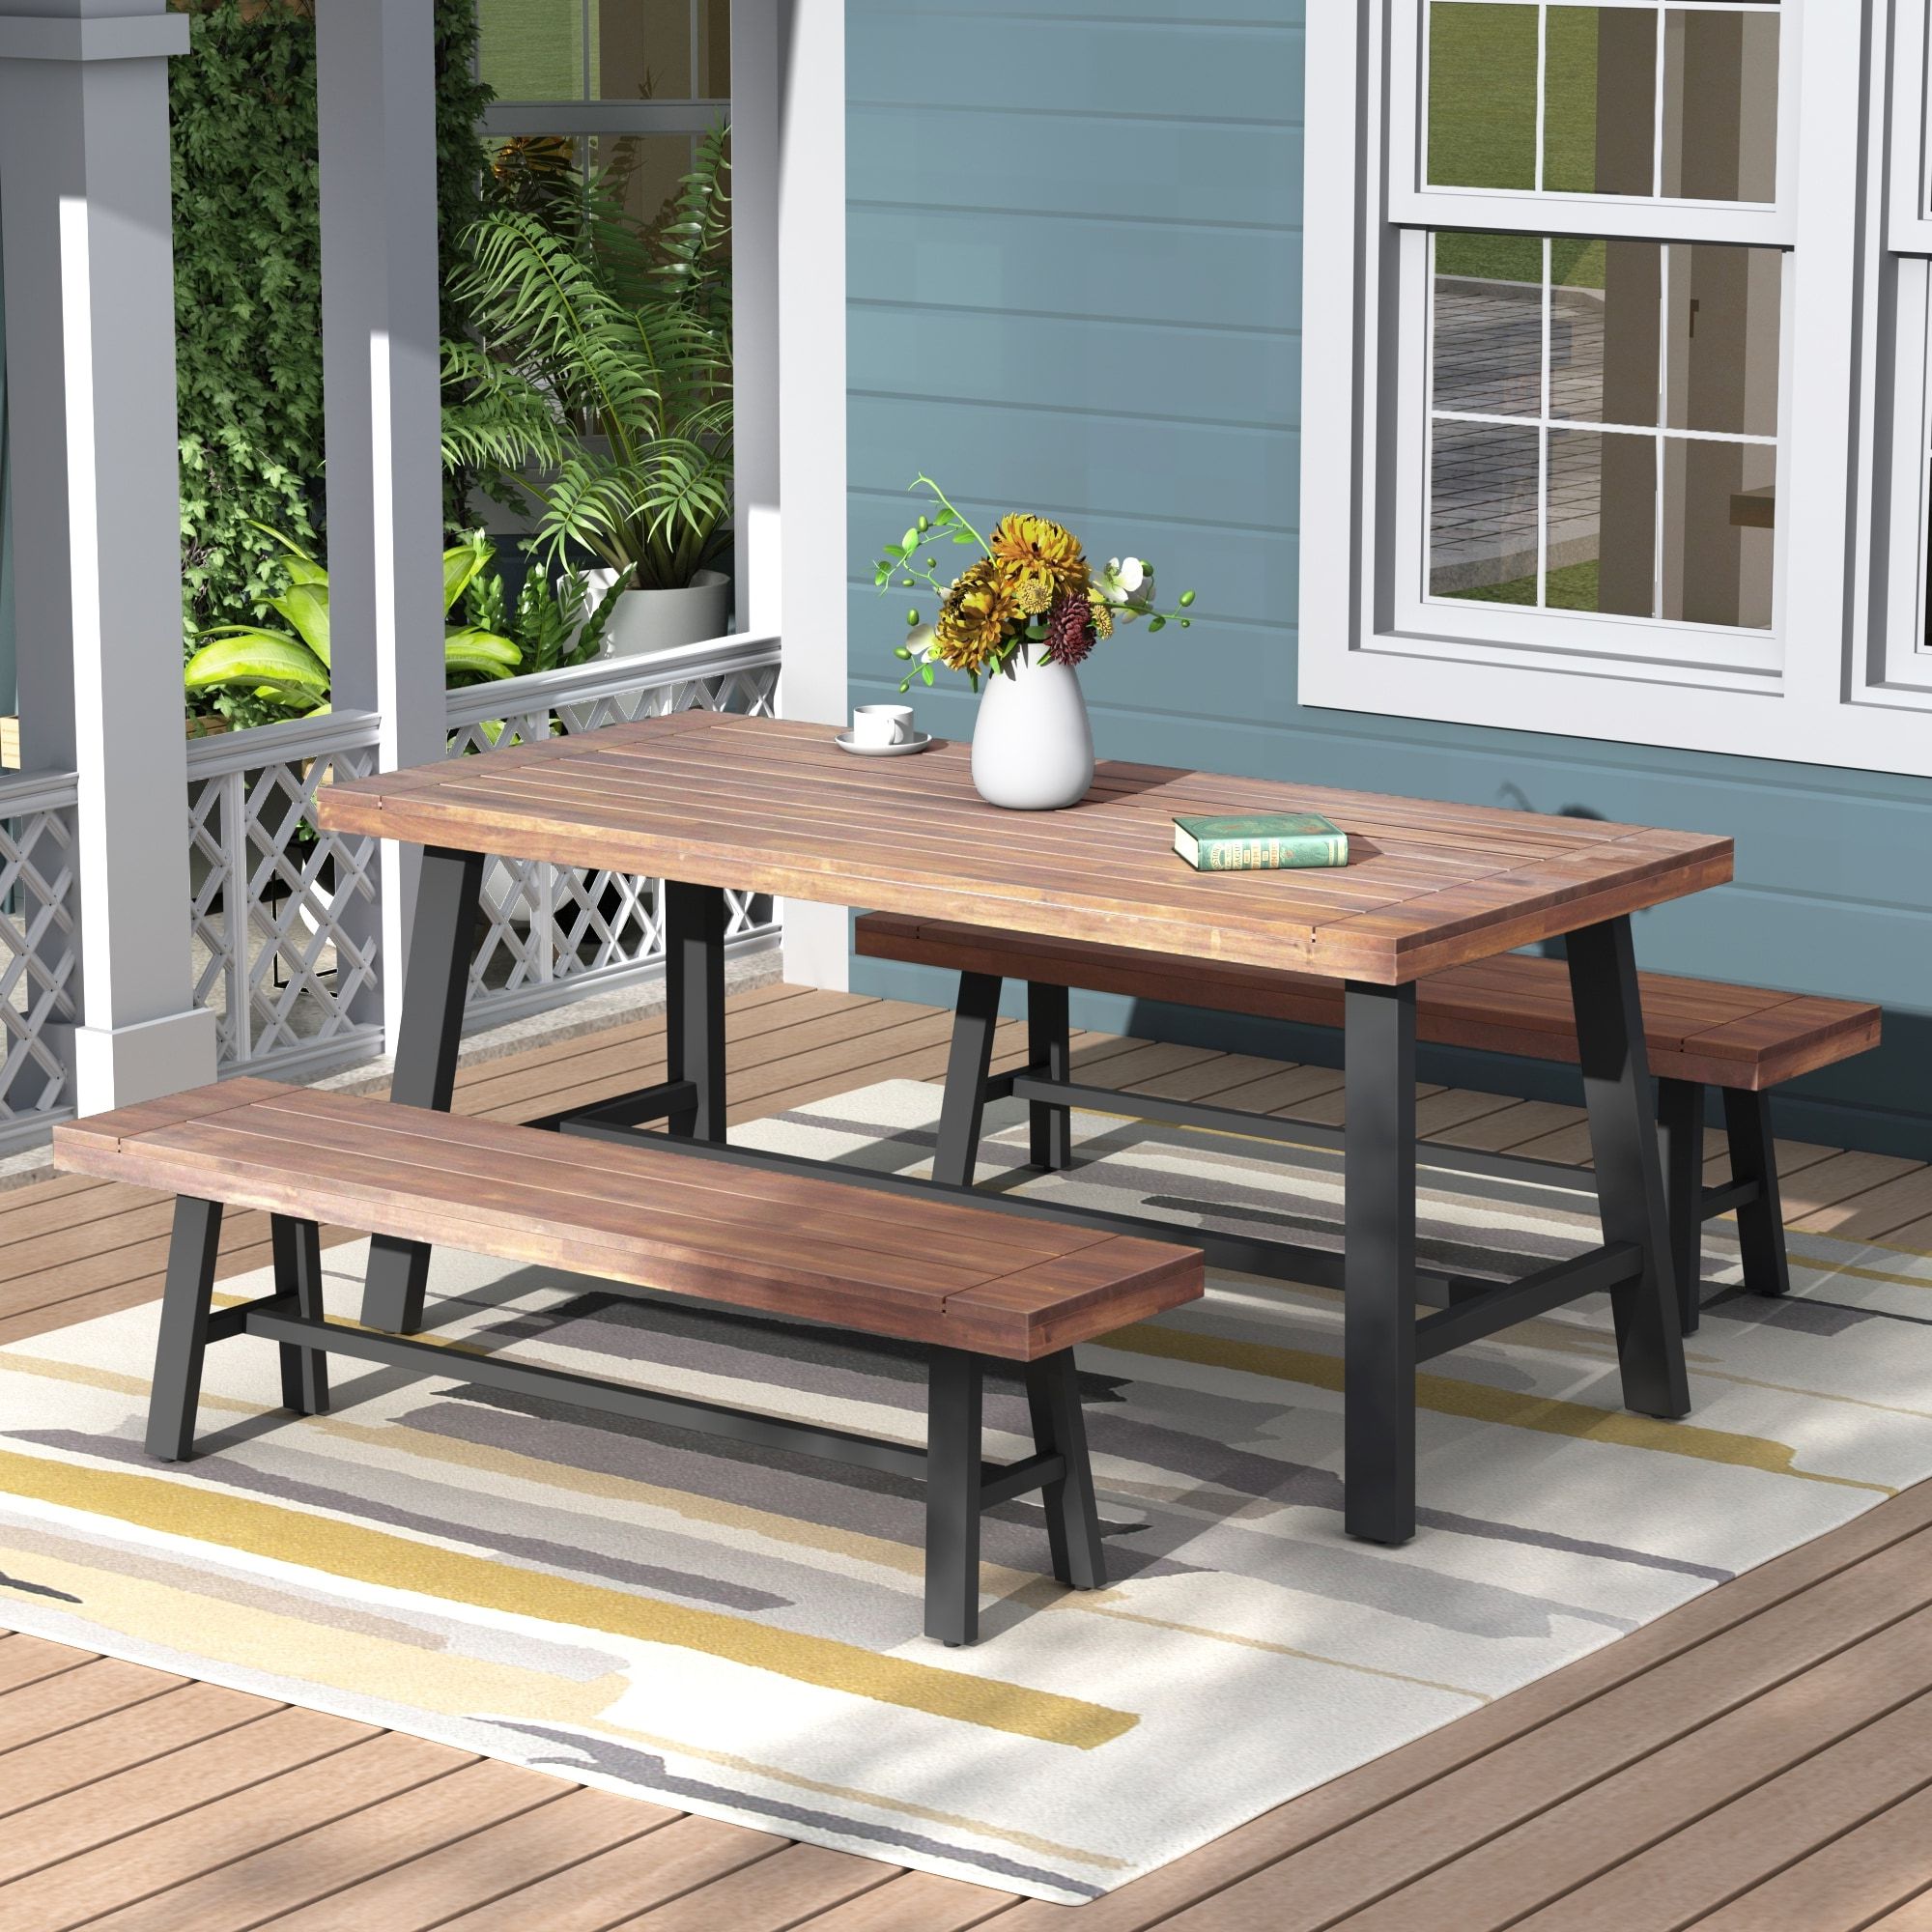 3pcs Walnut Finish Solid Wood Rectangle Outdoor Table Bench Set Inside 2019 Walnut Solid Wood Garden Benches (View 13 of 30)